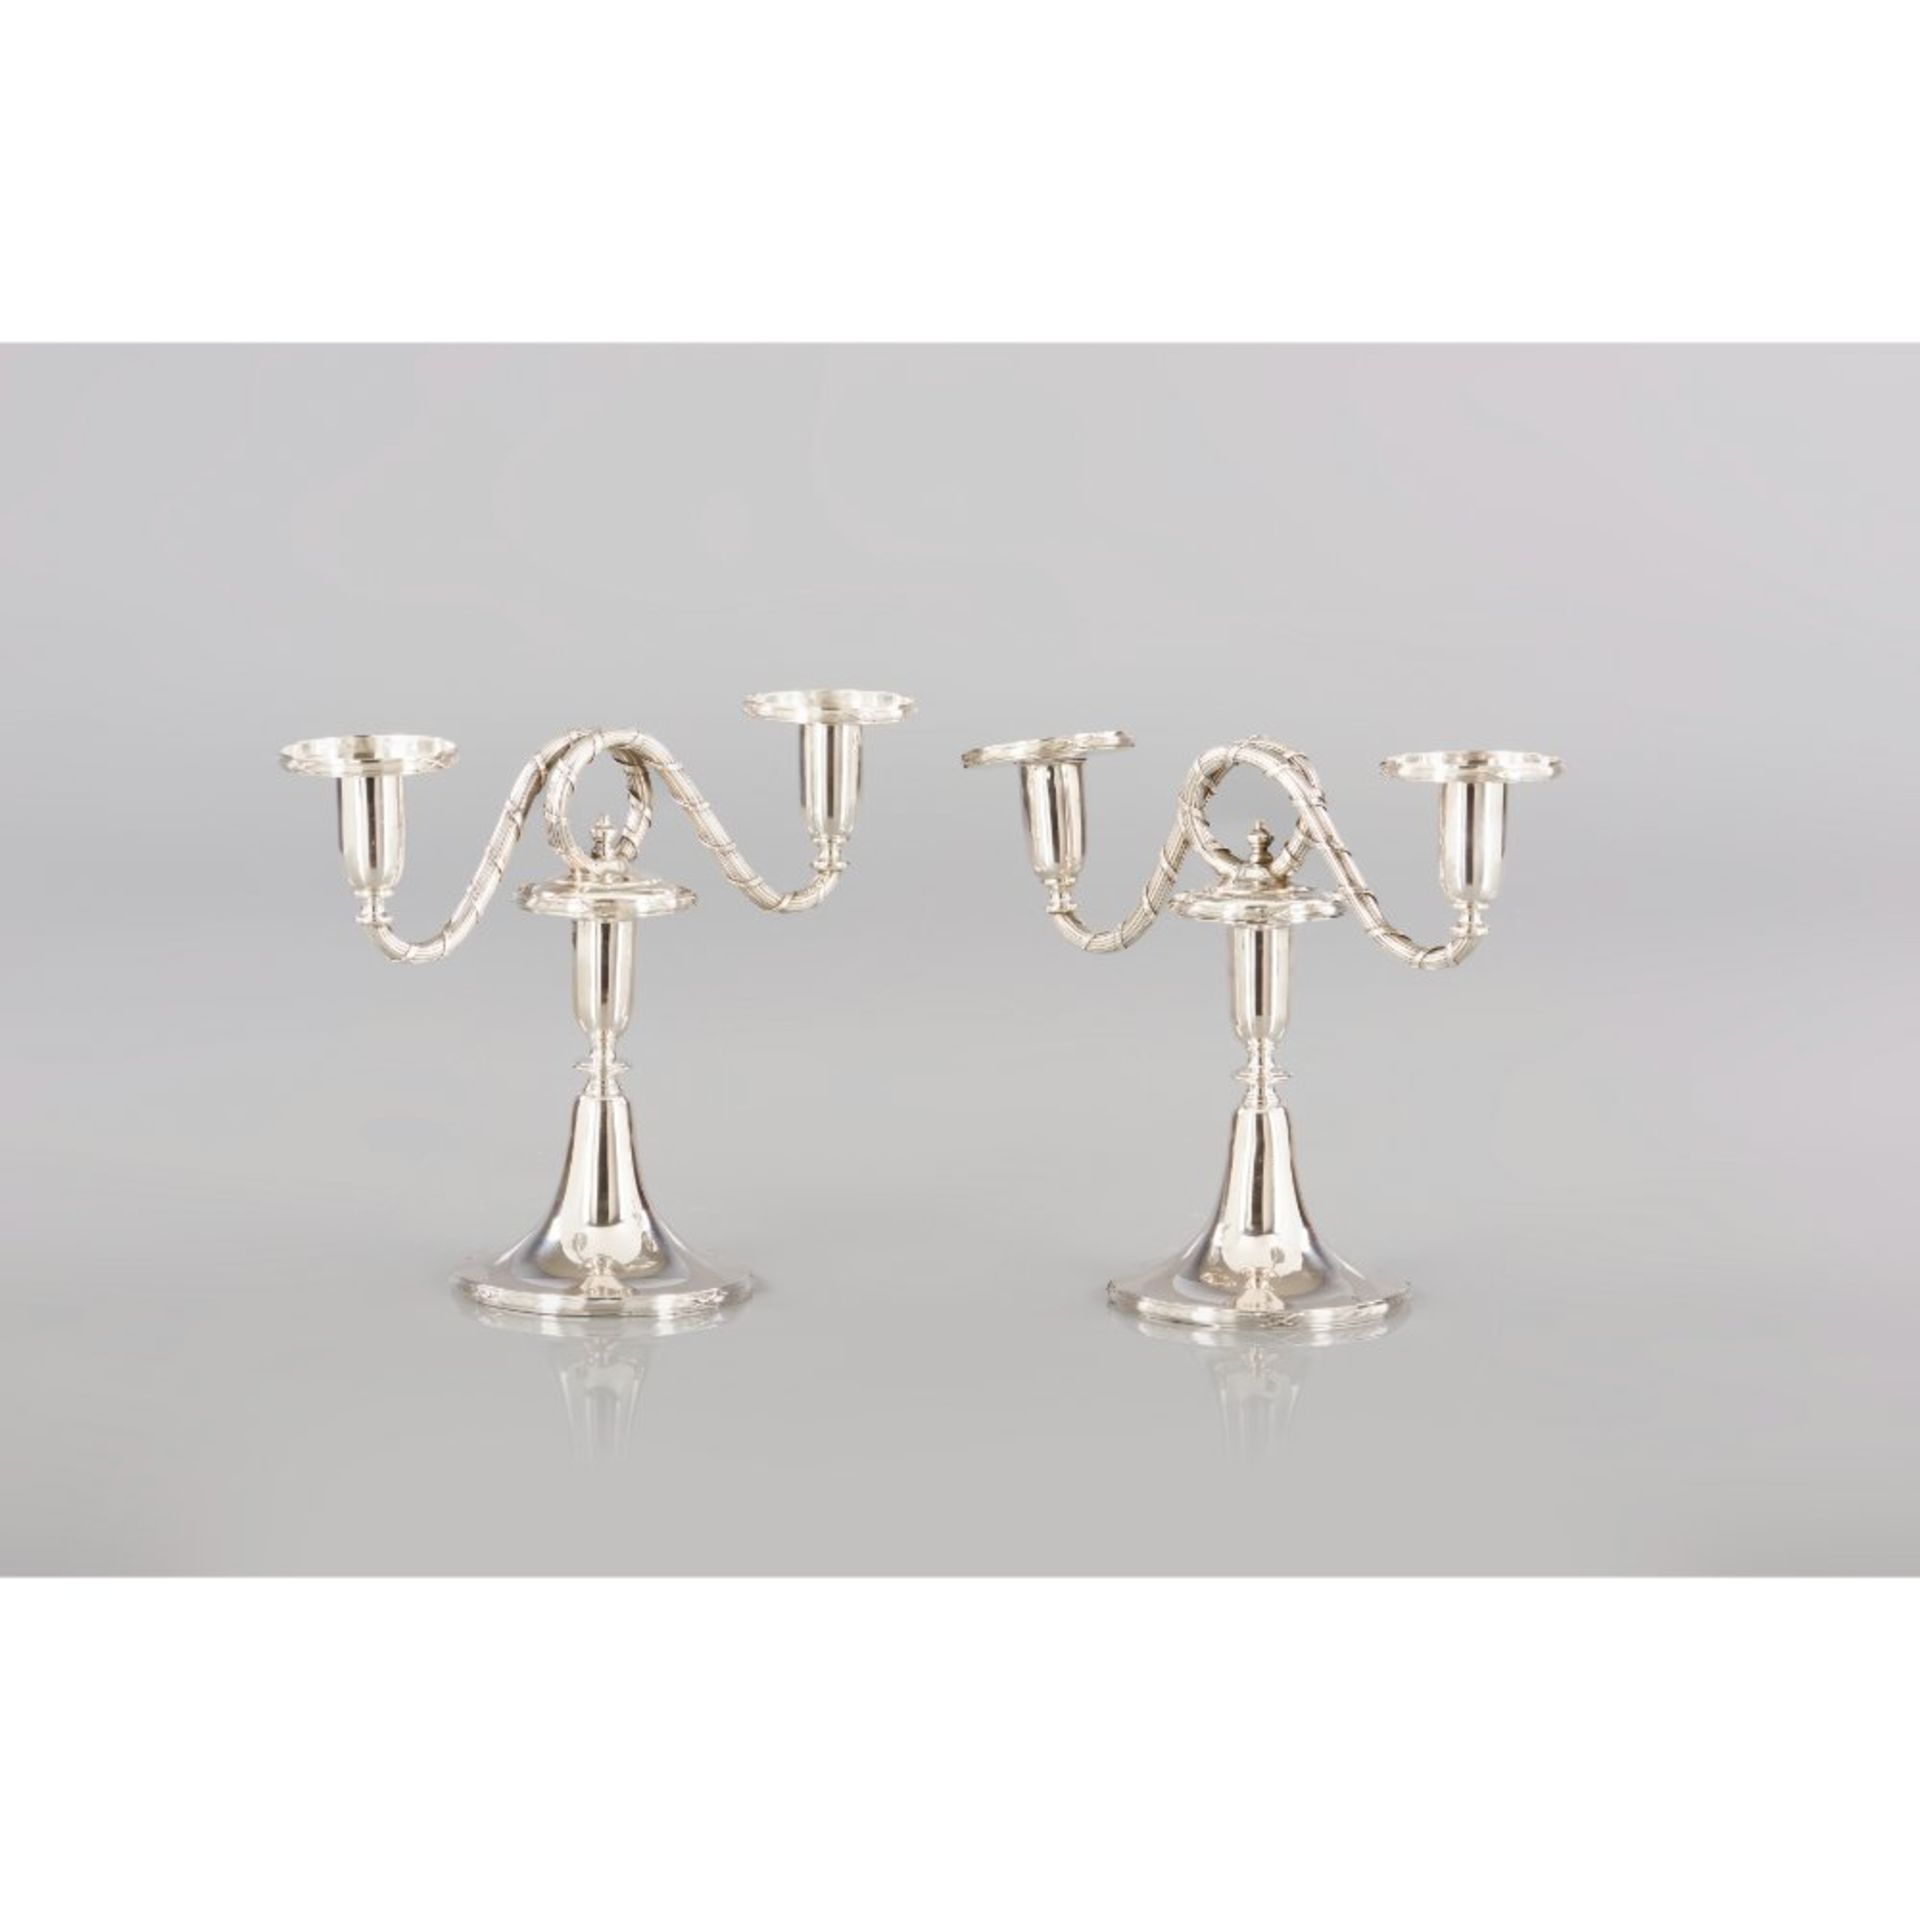 A Pair of two-light serpentine candelabra